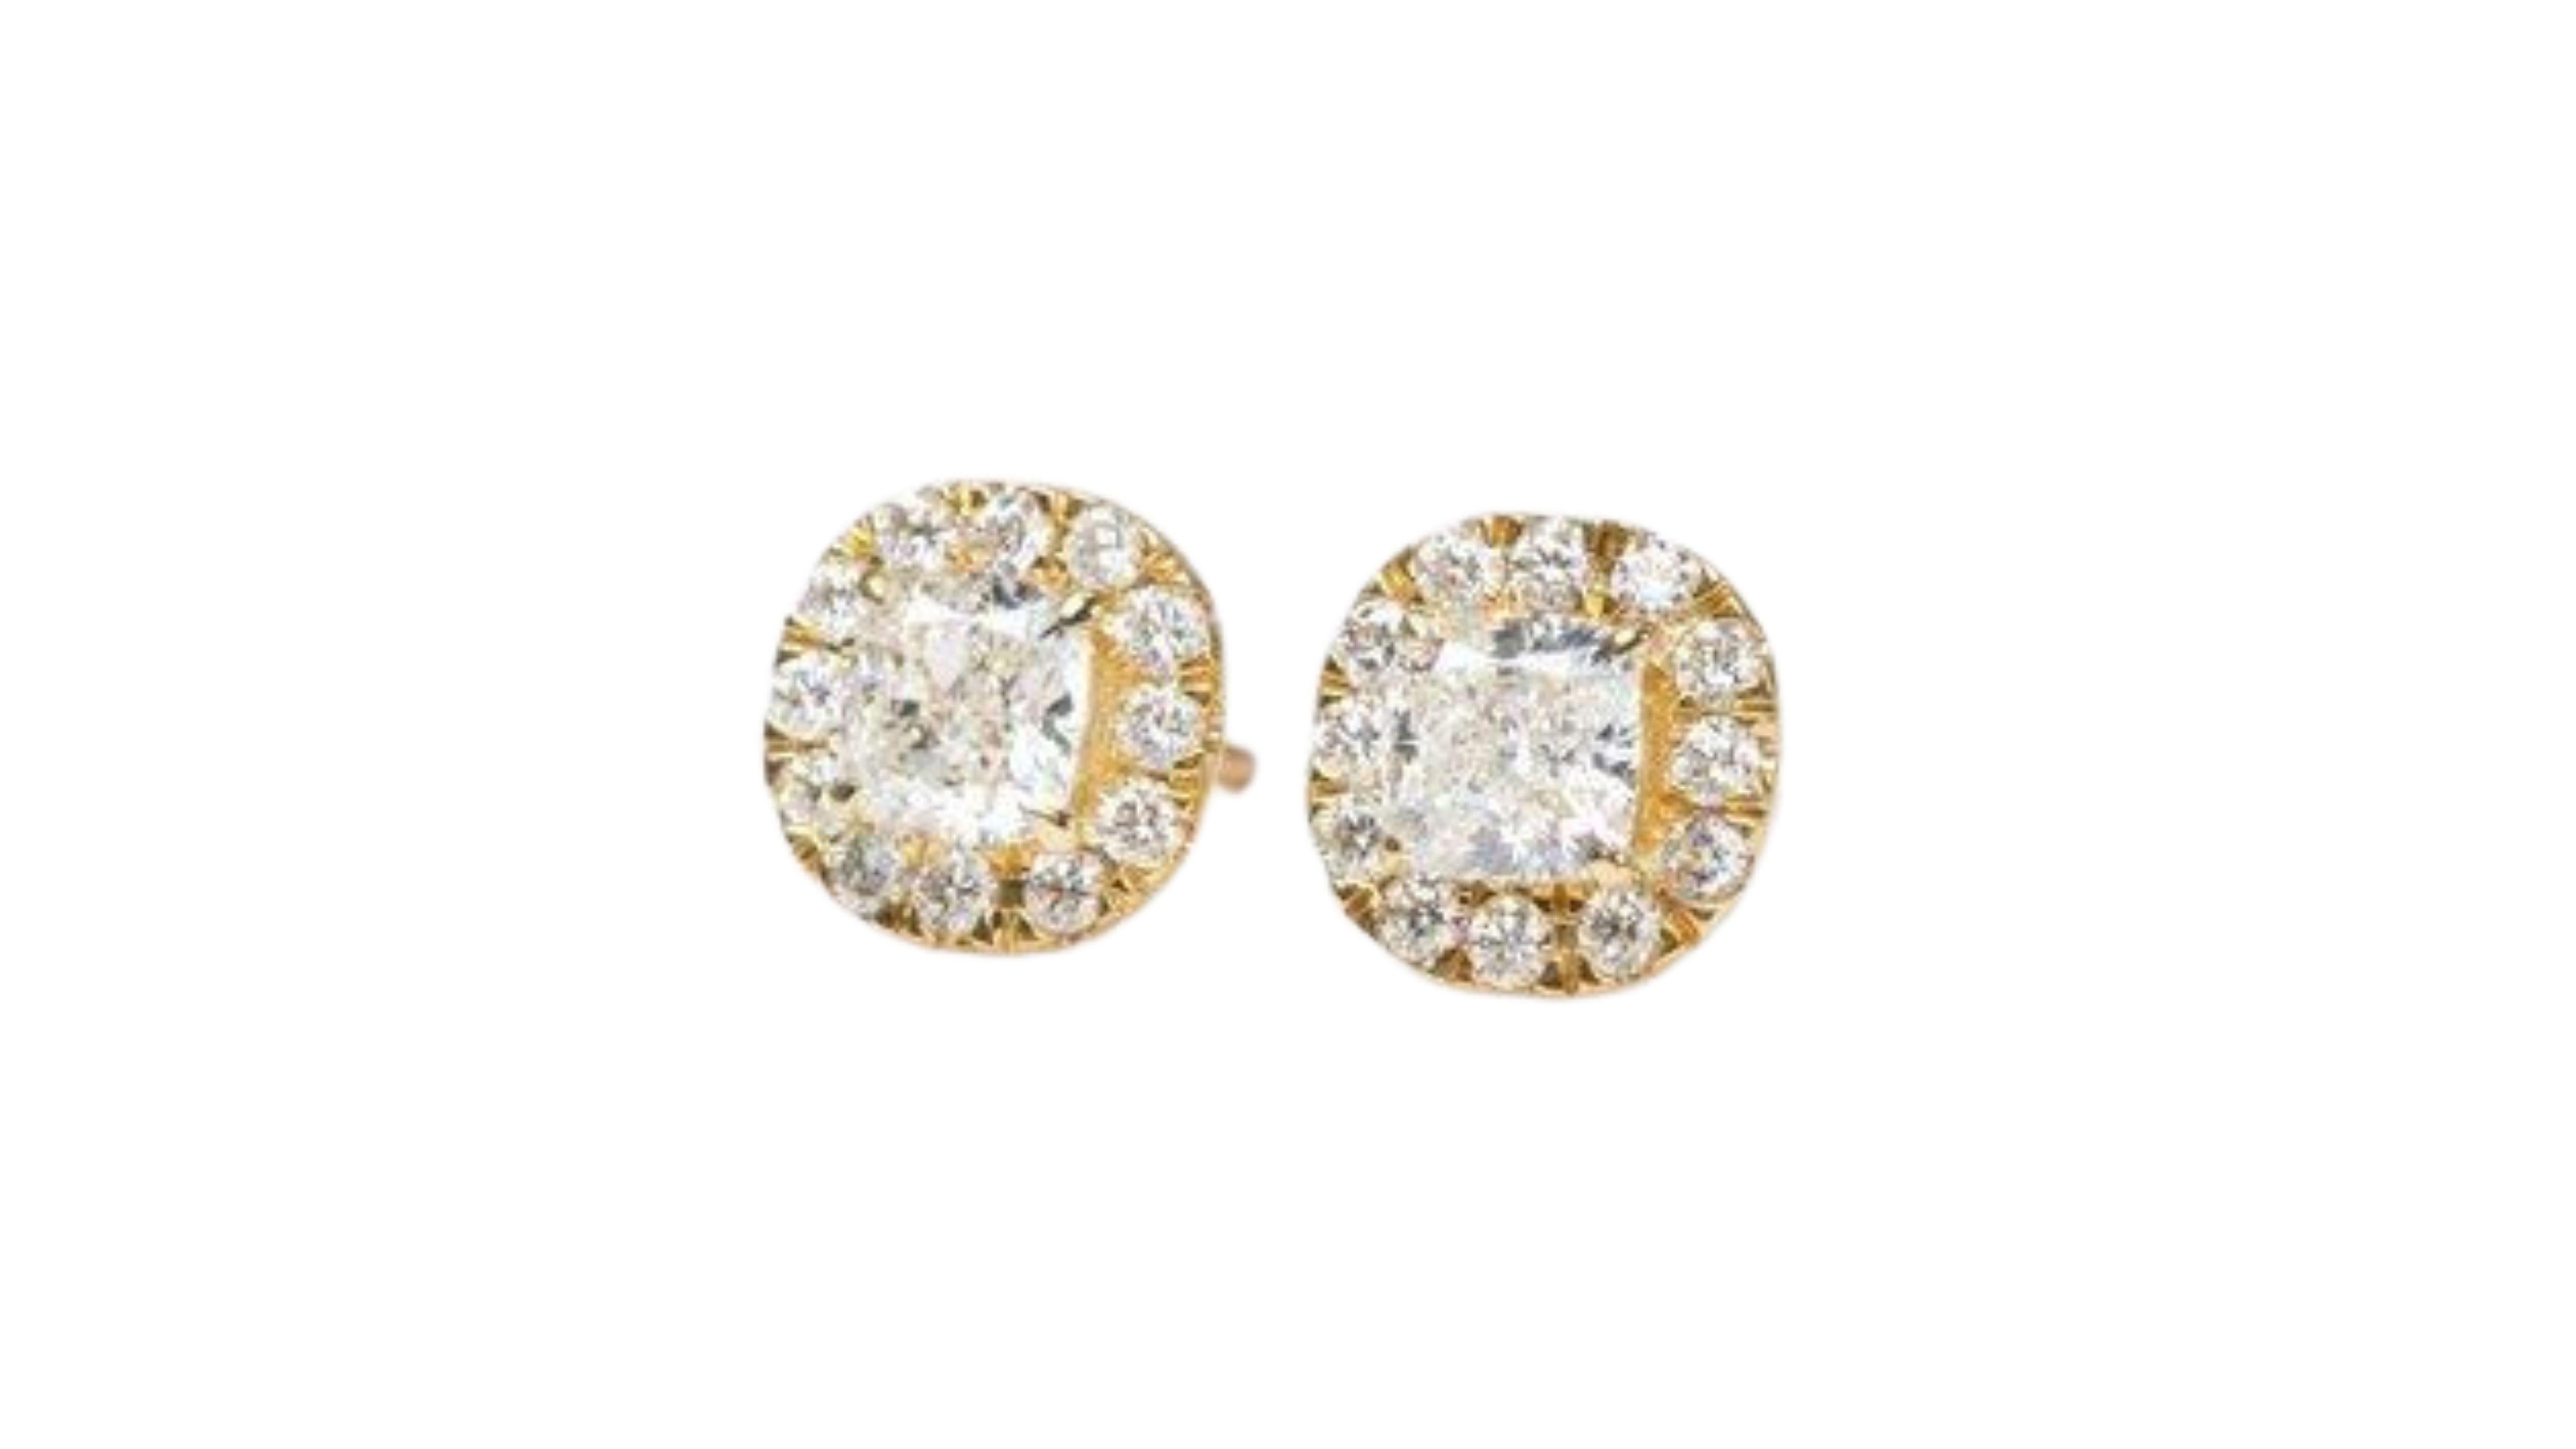 Cushion Cut Sparkling 18k Yellow Gold Stud Earrings with 1.27 Ct Natural Diamonds, Aig Cert For Sale